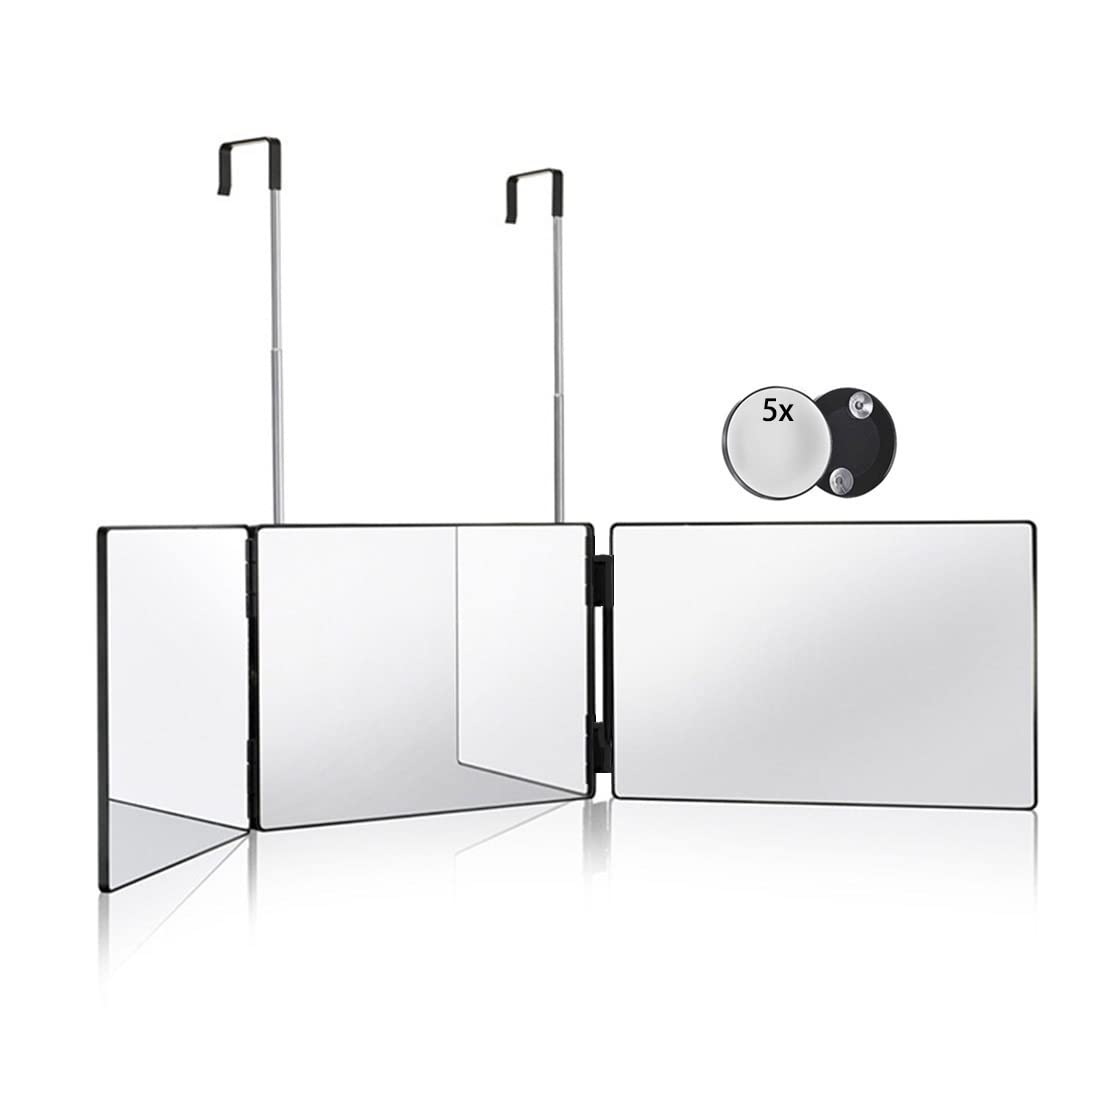 HIEEY 3 Way Mirror for Hair cutting,360 Trifold Mirror with Height Adjustable Telescoping Hooks,and 5X Magnification Mirror,for 